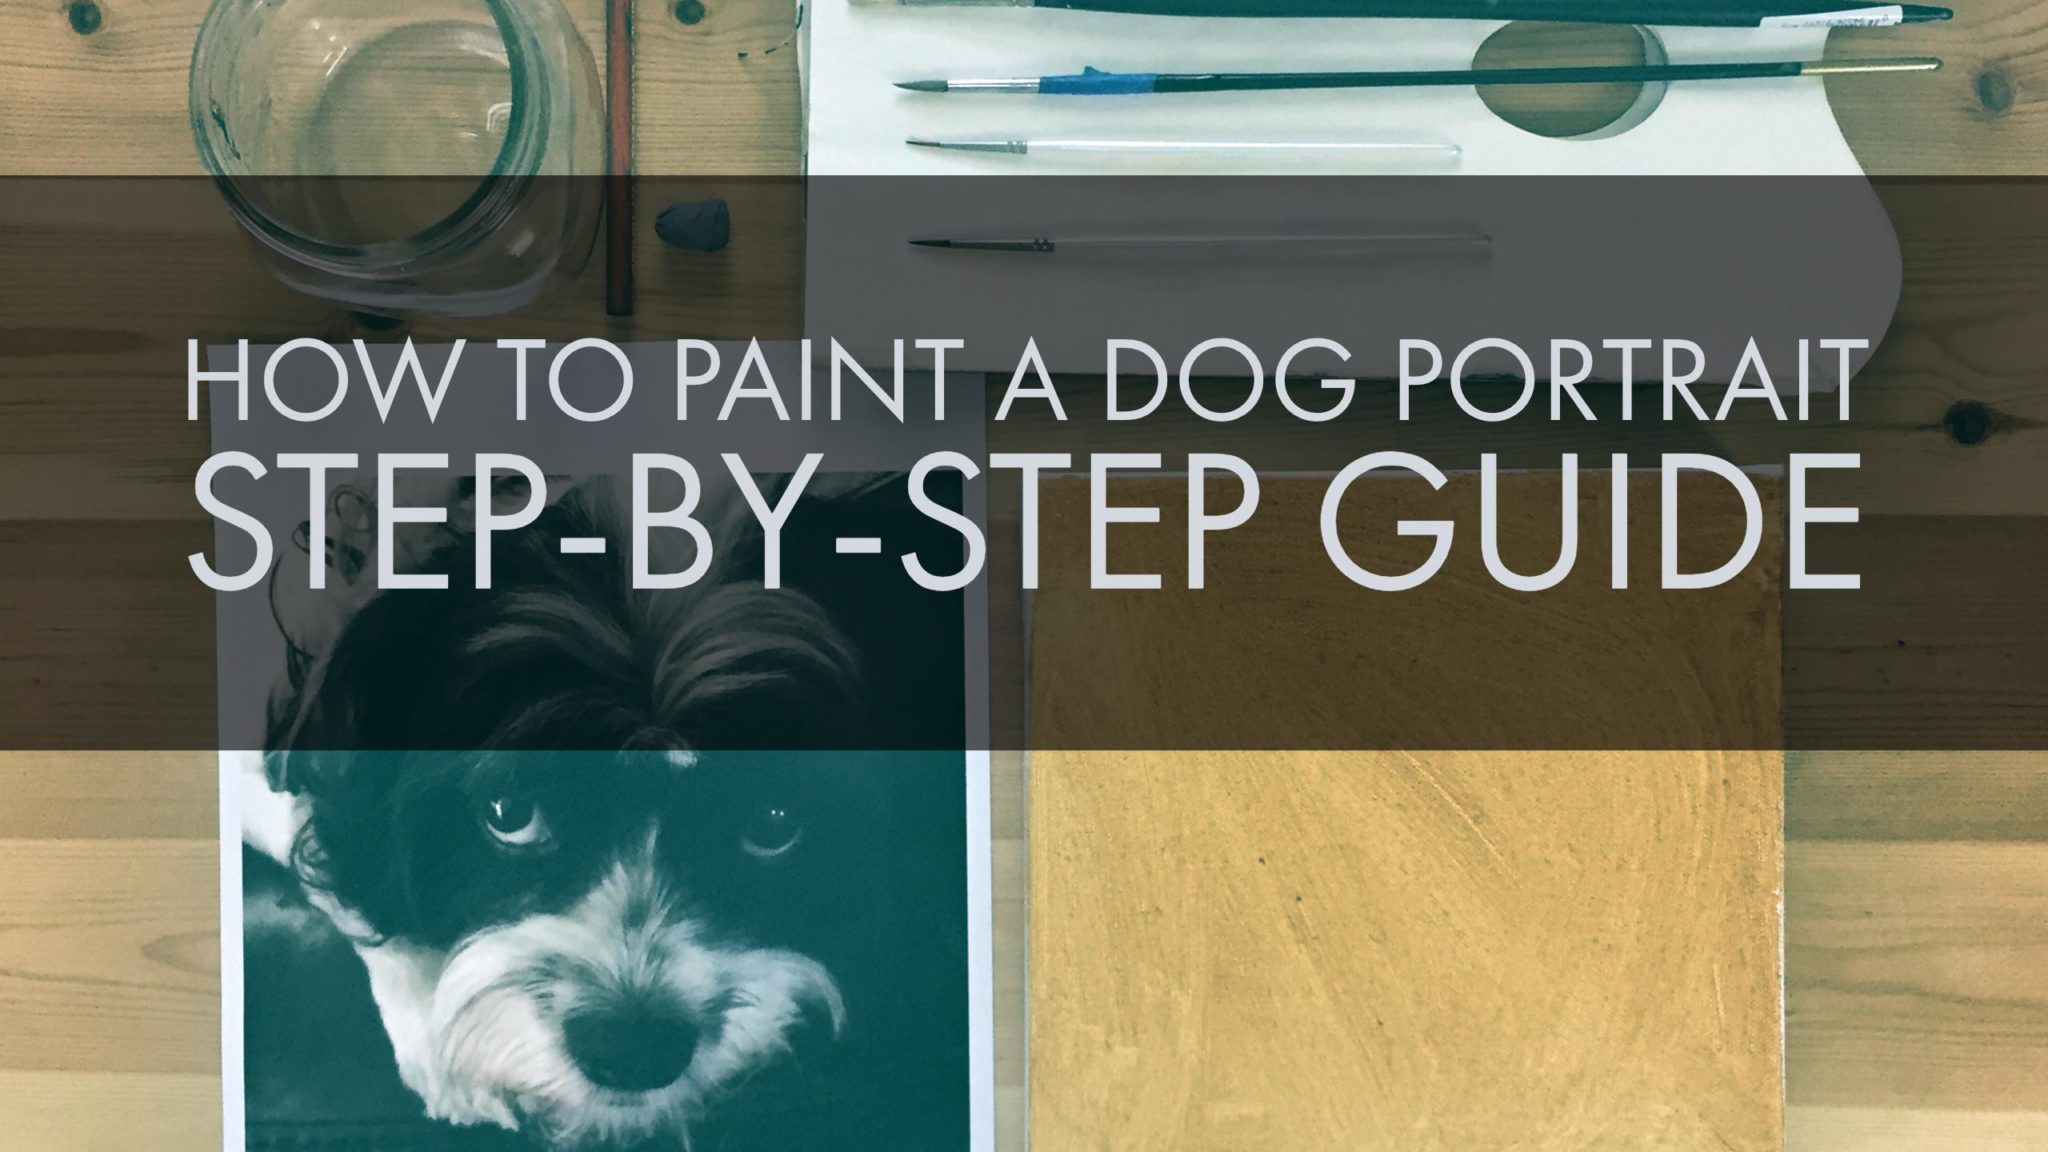 How to paint a dog portrait step-by-step